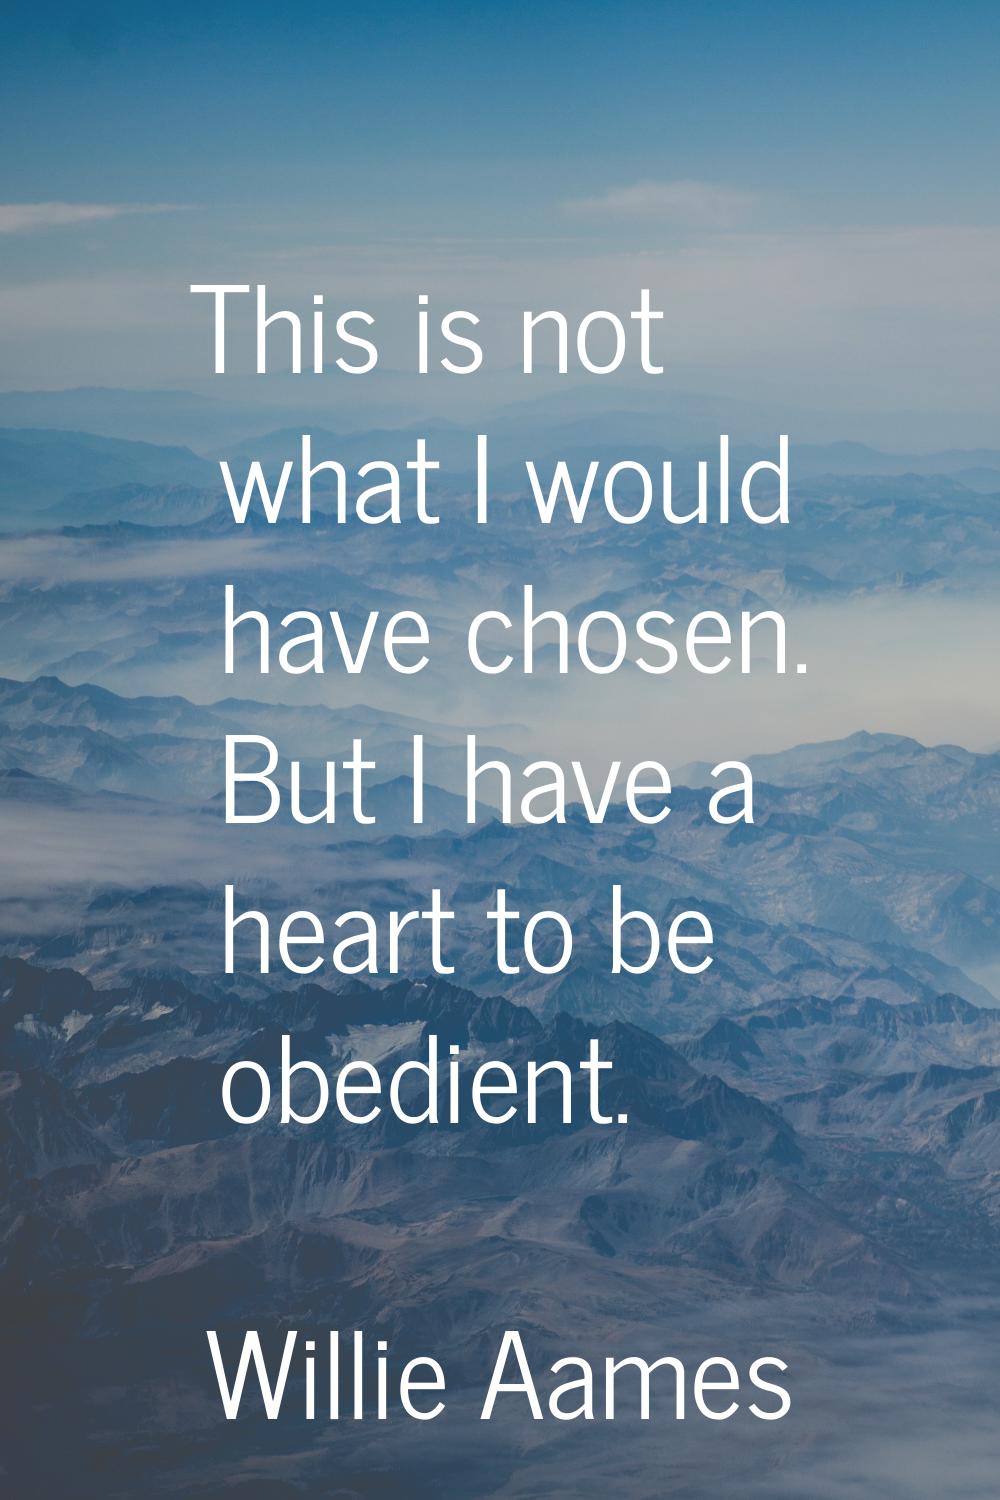 This is not what I would have chosen. But I have a heart to be obedient.